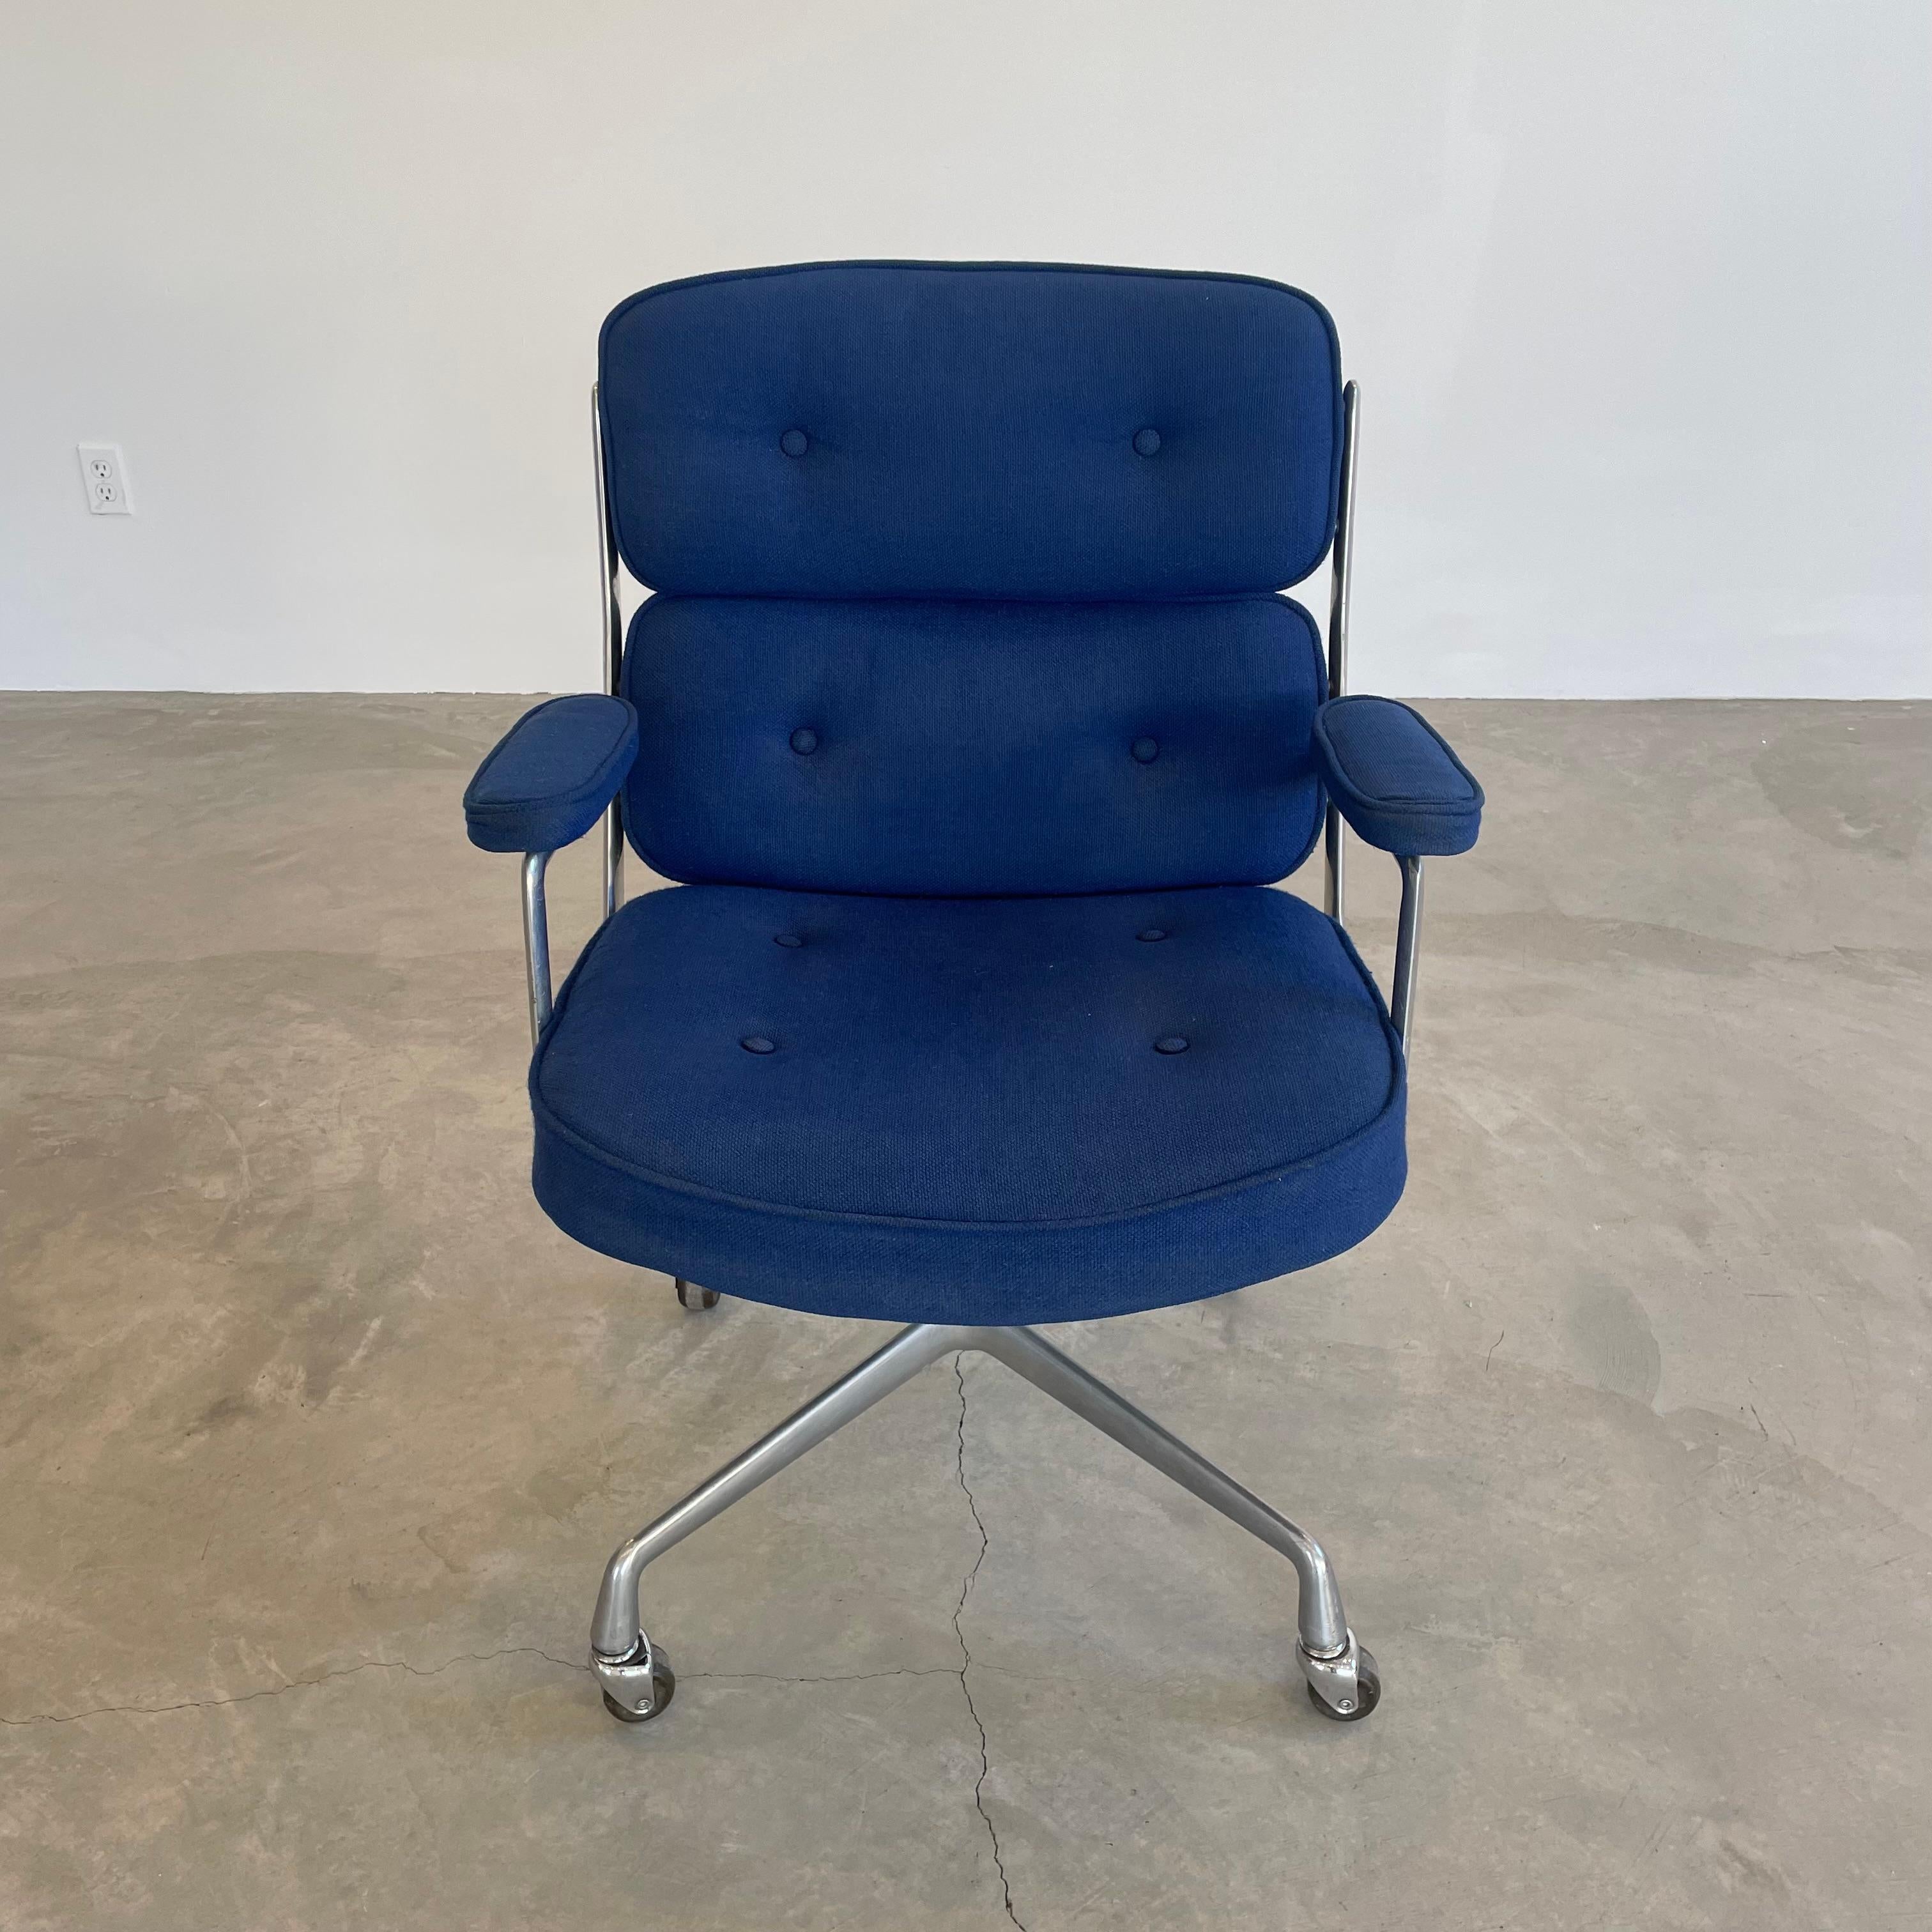 Eames Time Life Chair in Navy Blue Burlap for Herman Miller, 1978 USA For Sale 6